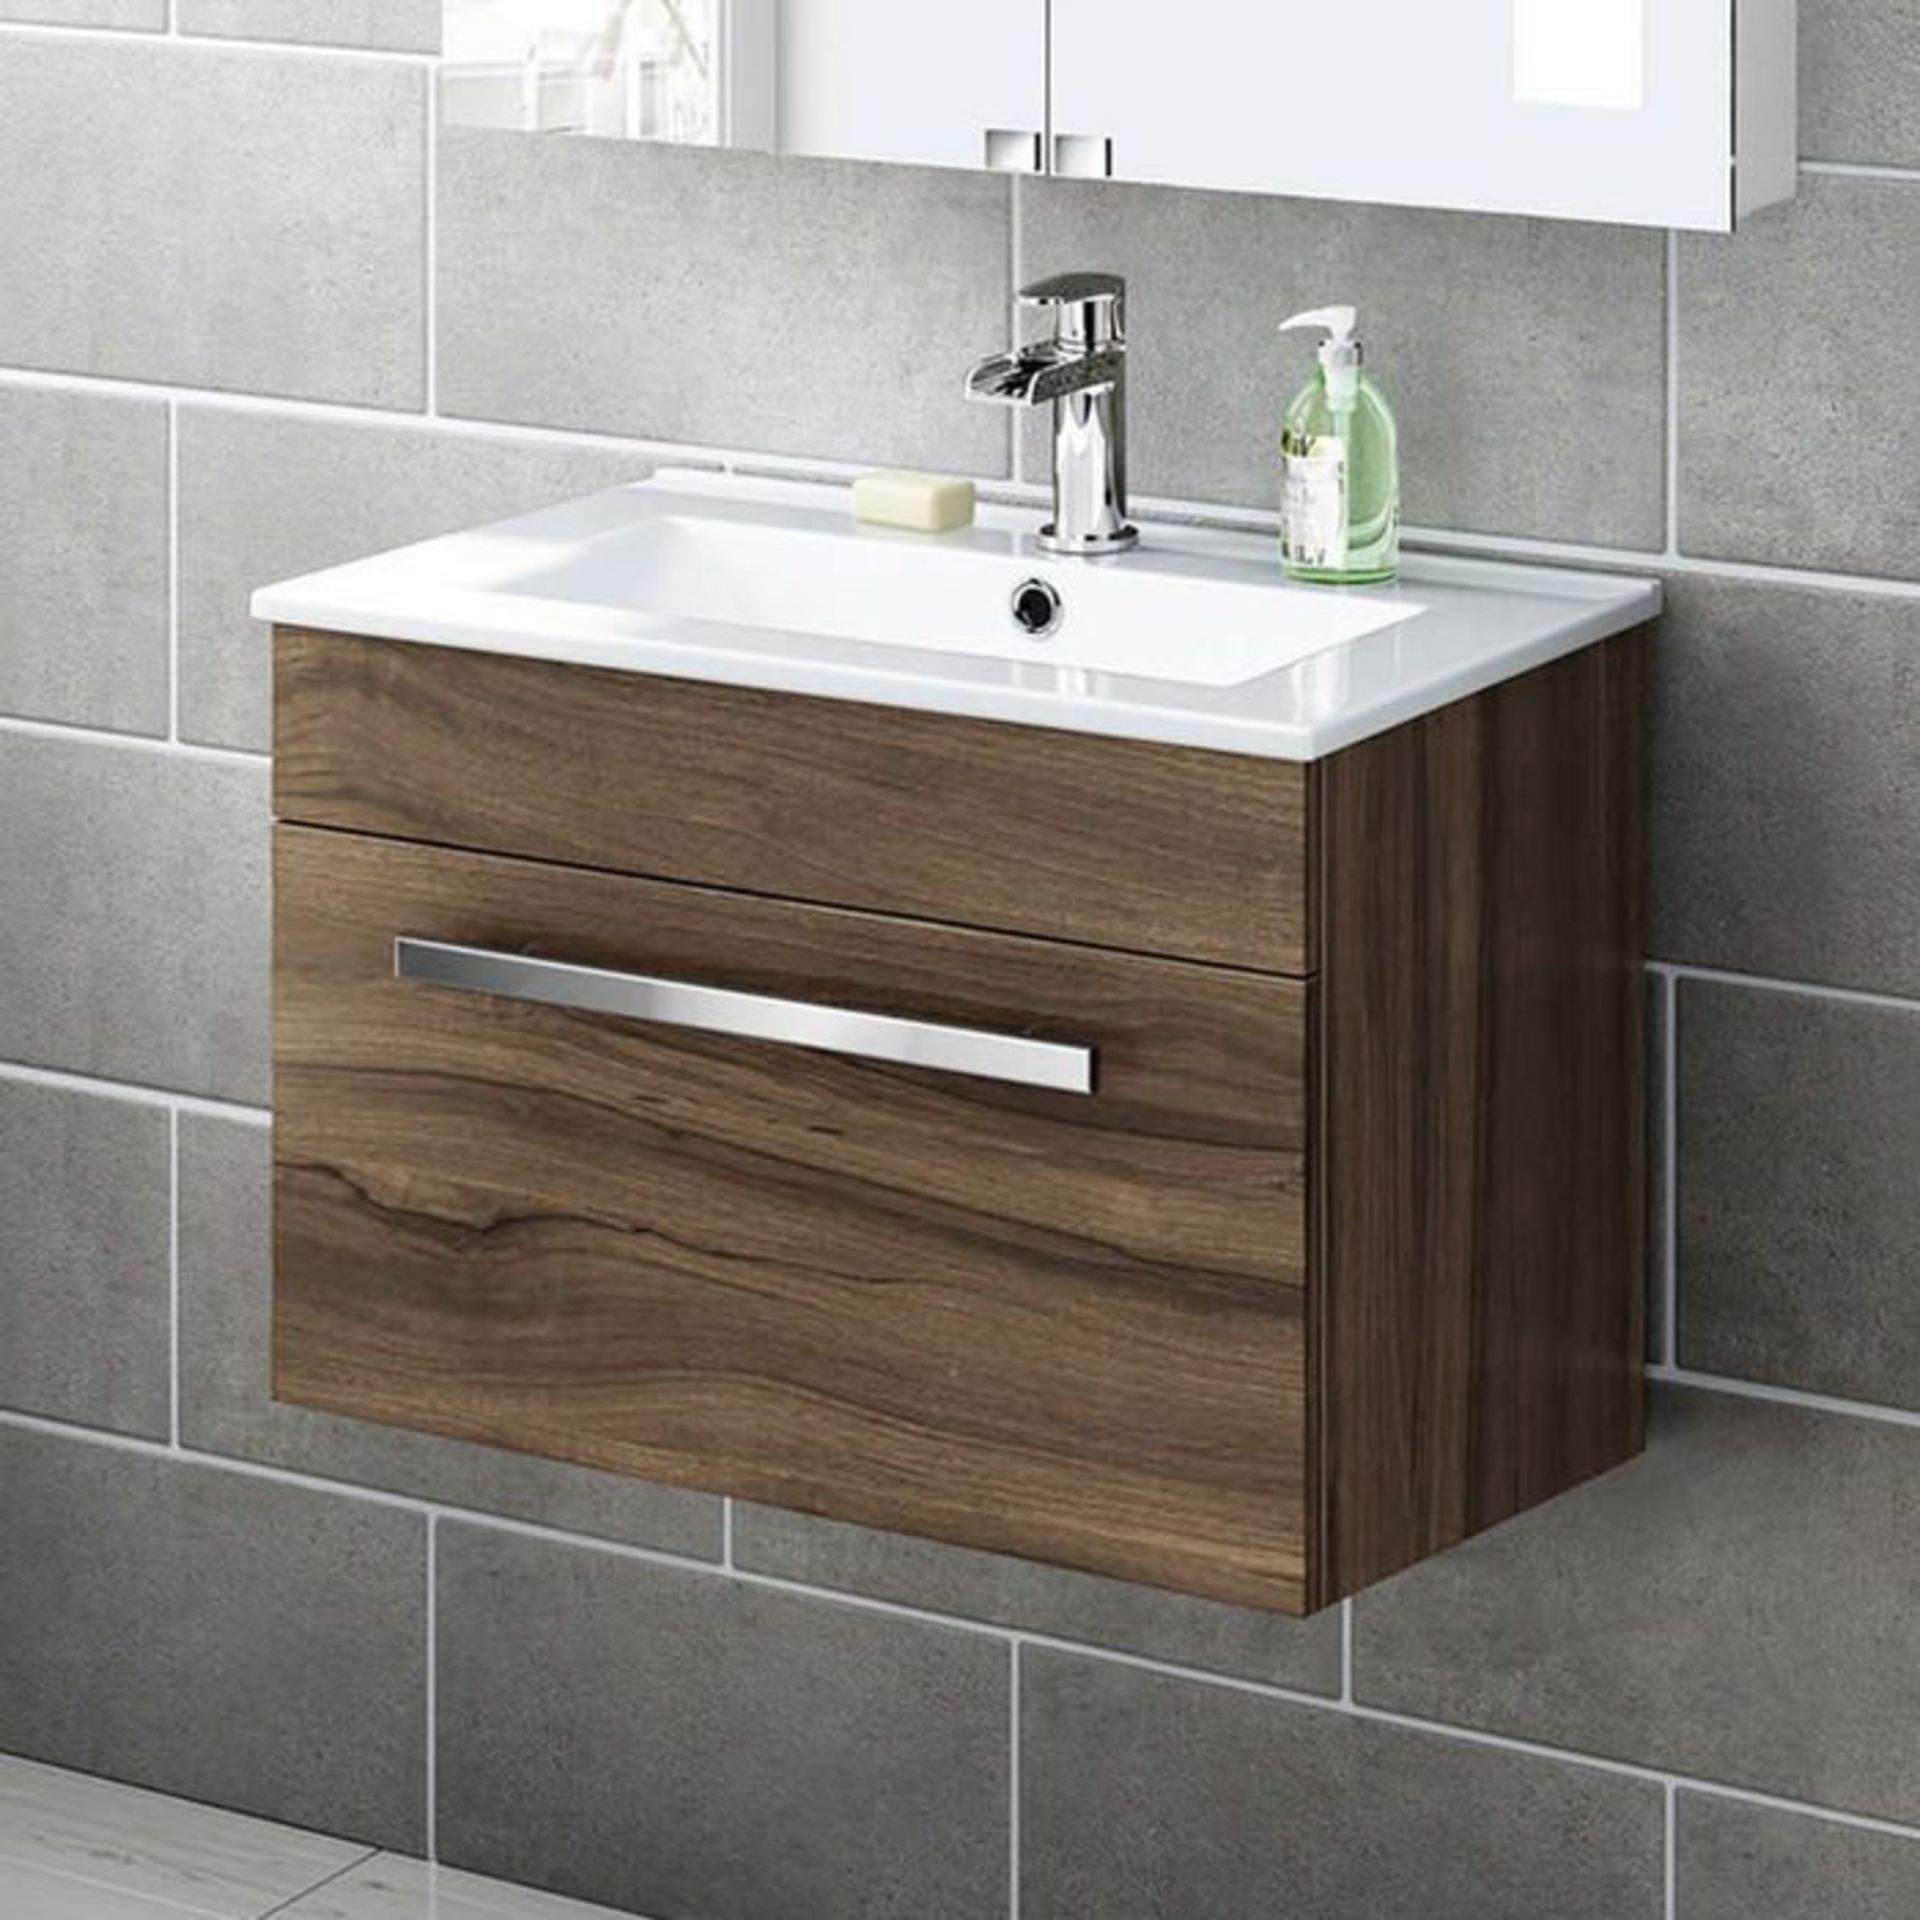 (S57) 600mm Avon Walnut Effect Basin Cabinet - Wall Hung RRP £449.99. COMES COMPLETE WITH BASIN.